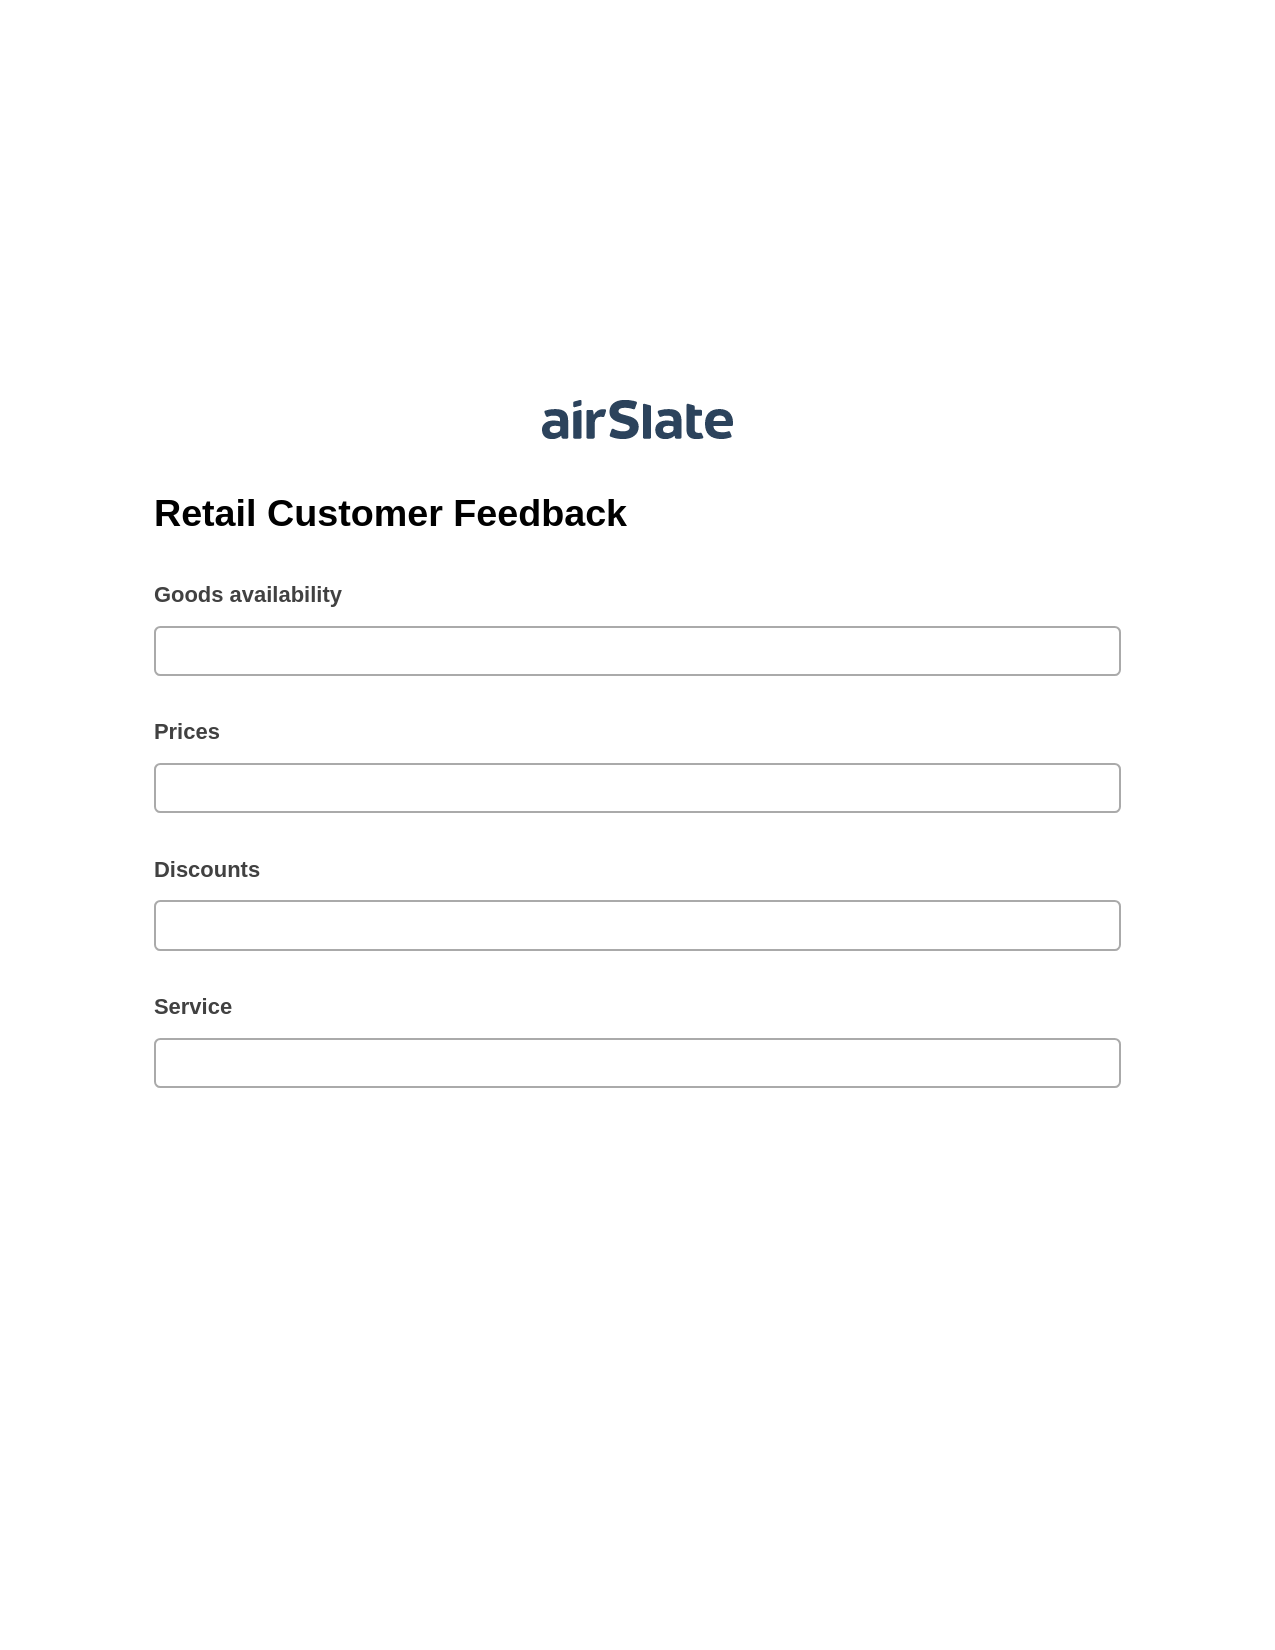 Retail Customer Feedback Pre-fill Dropdowns from Office 365 Excel Bot, Open as Role Bot, Export to Excel 365 Bot